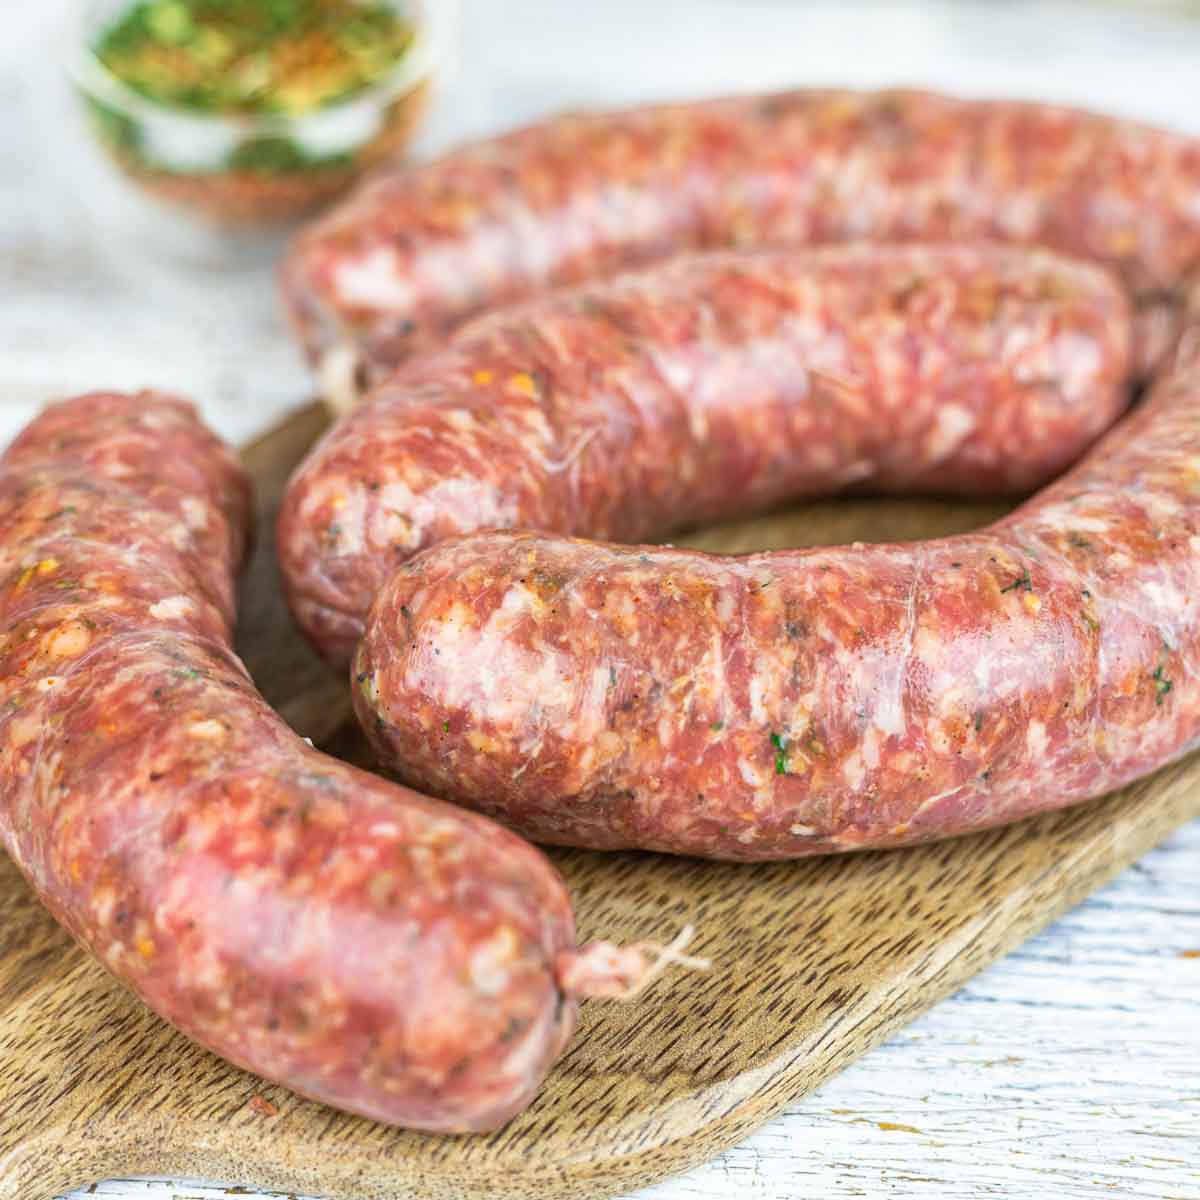 Low Carb Sausages prepared on the board for baking.